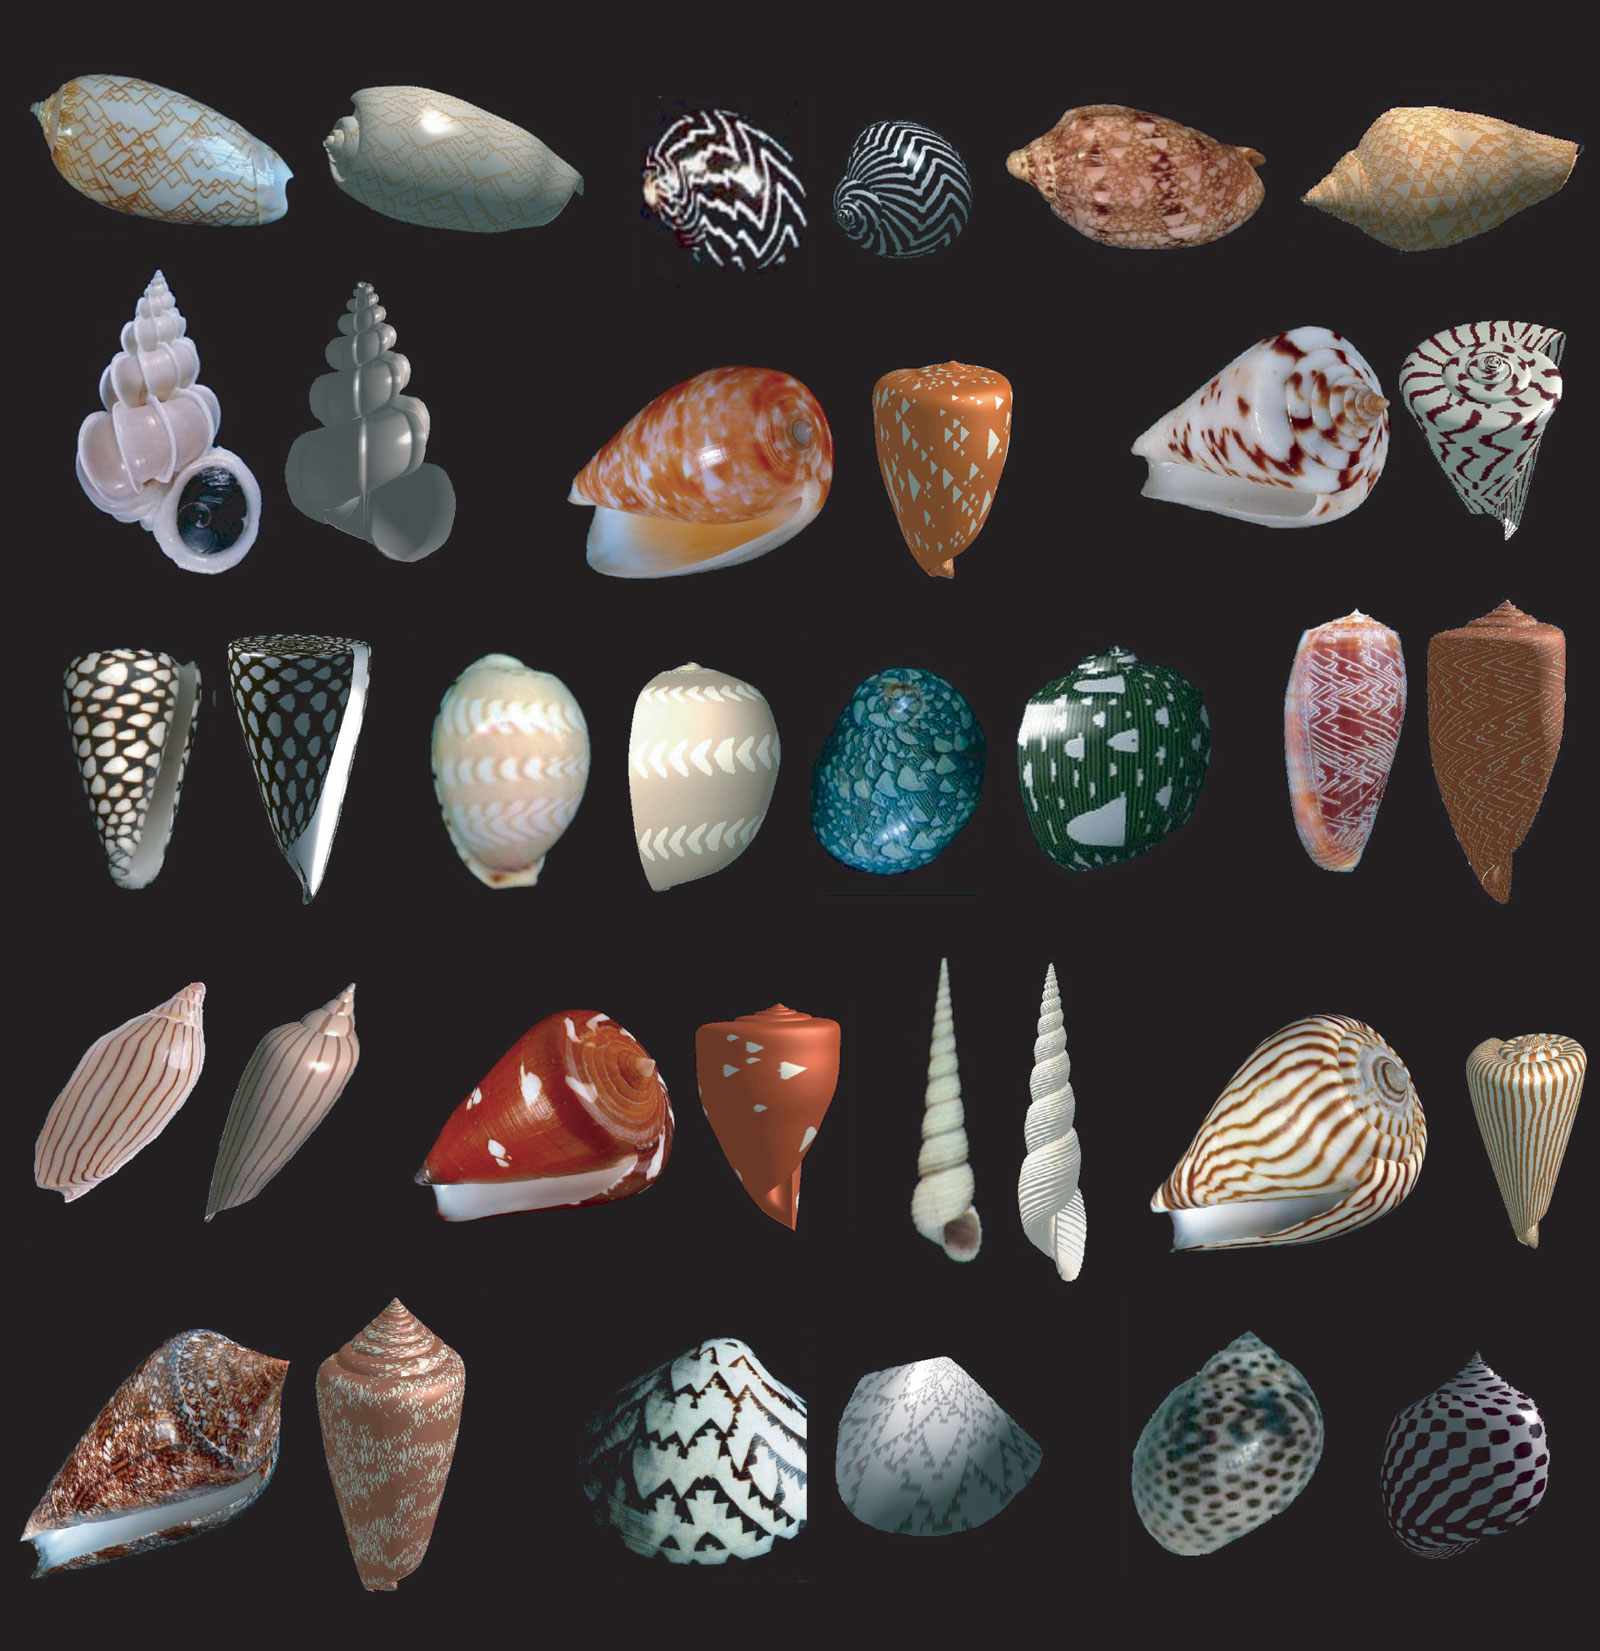 natural shell structures